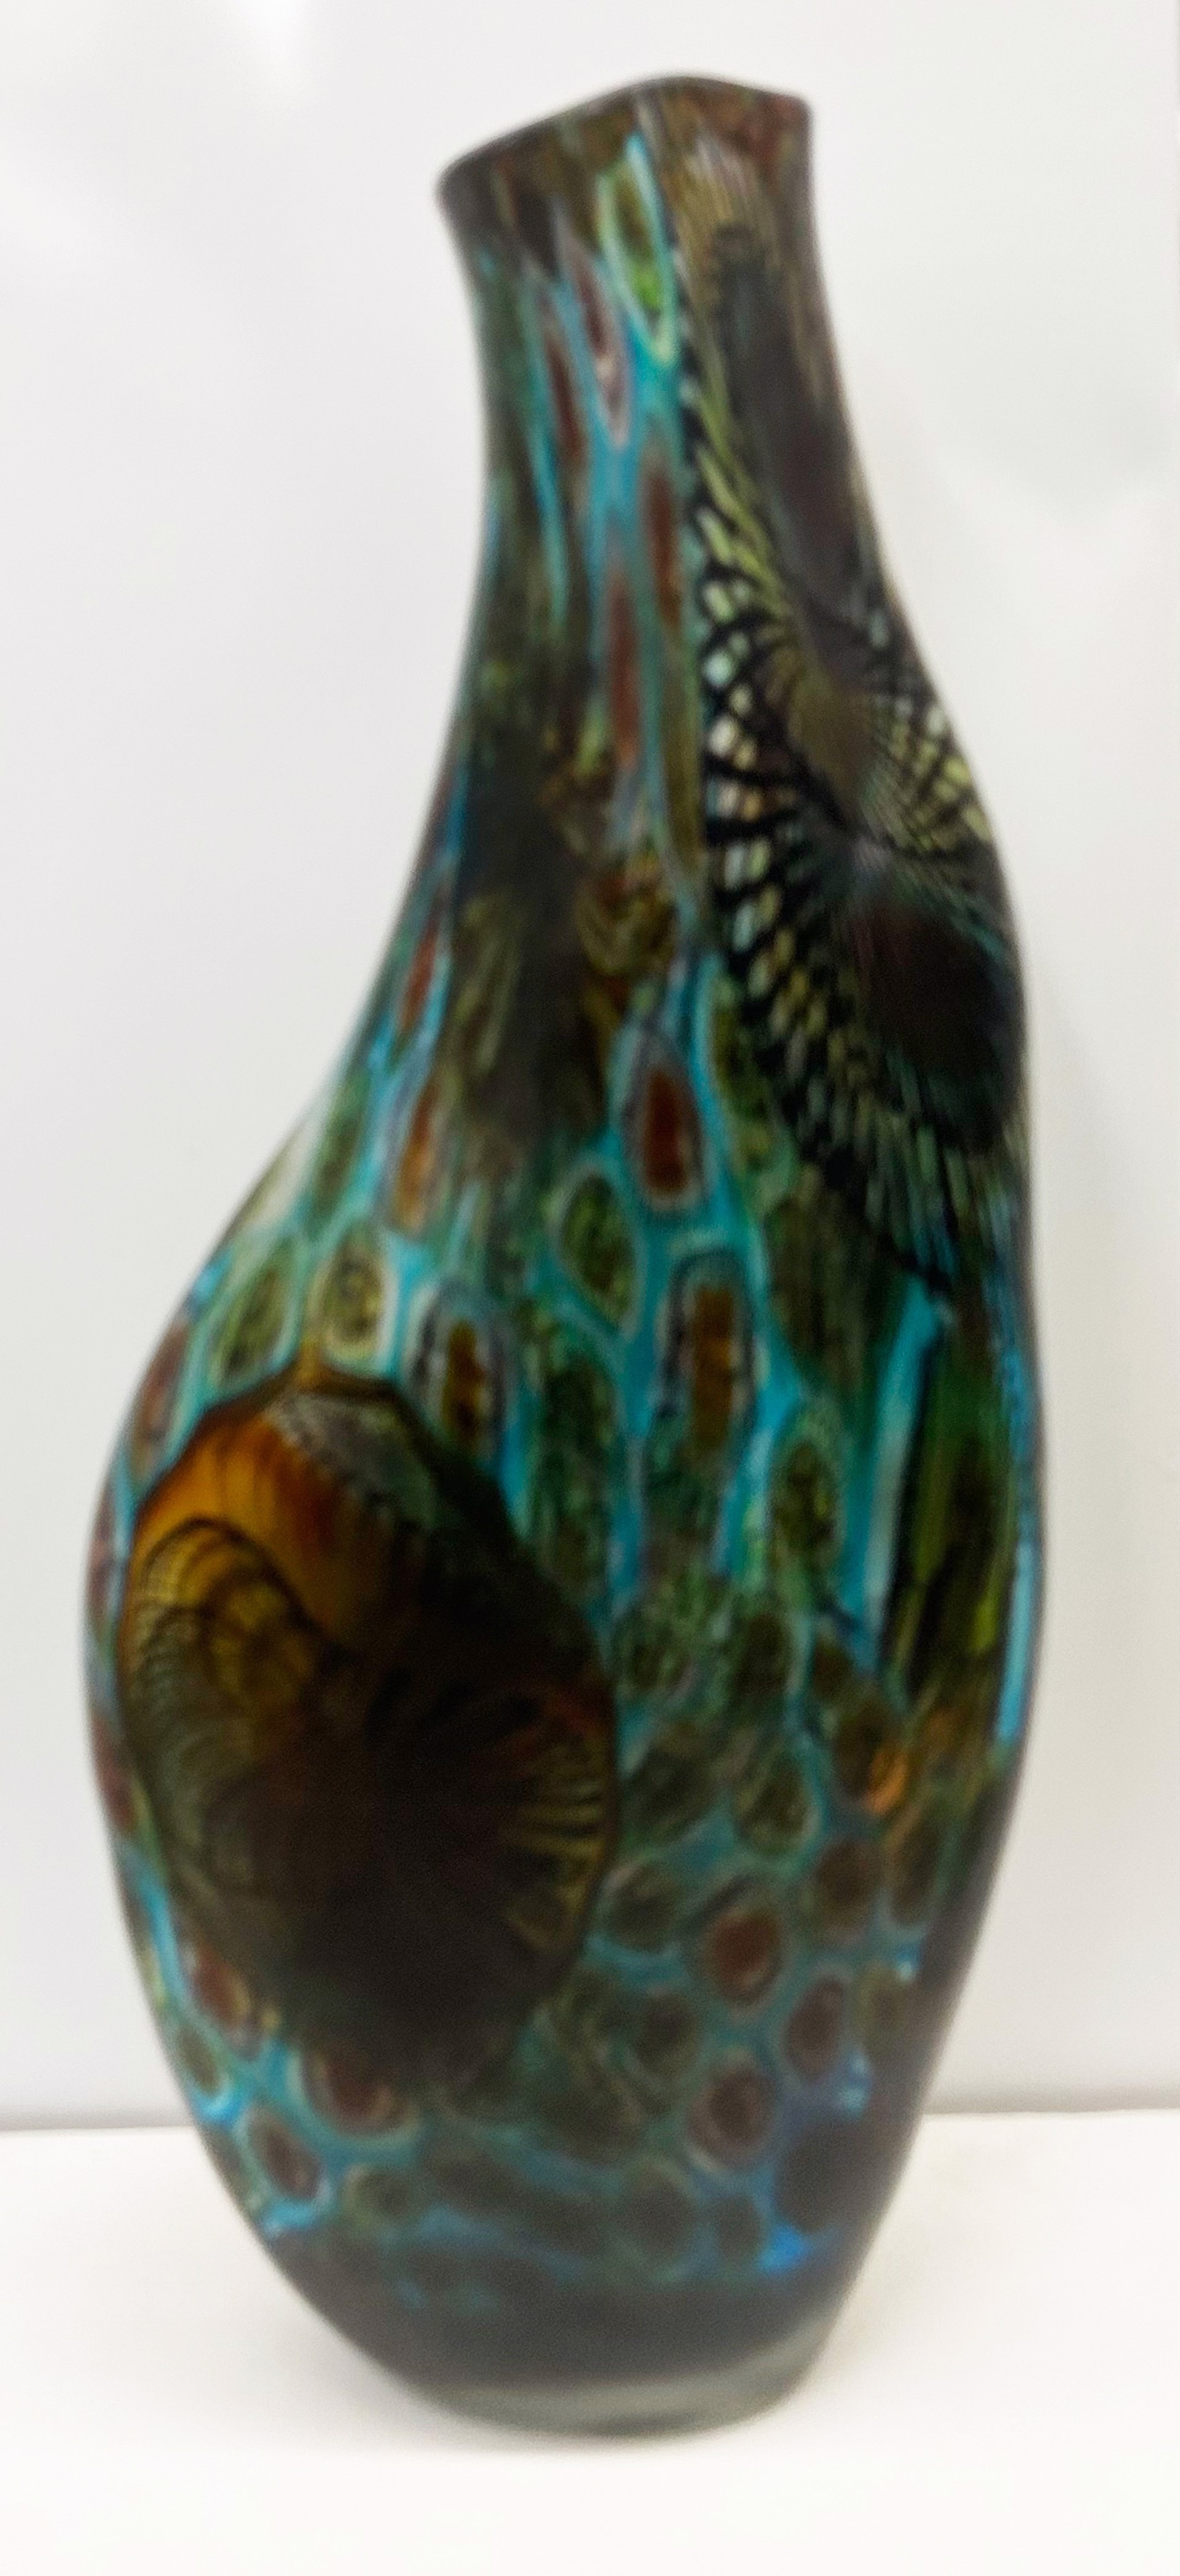 Blue, Green, and Amber Vessel by Massimiliano Schiavon